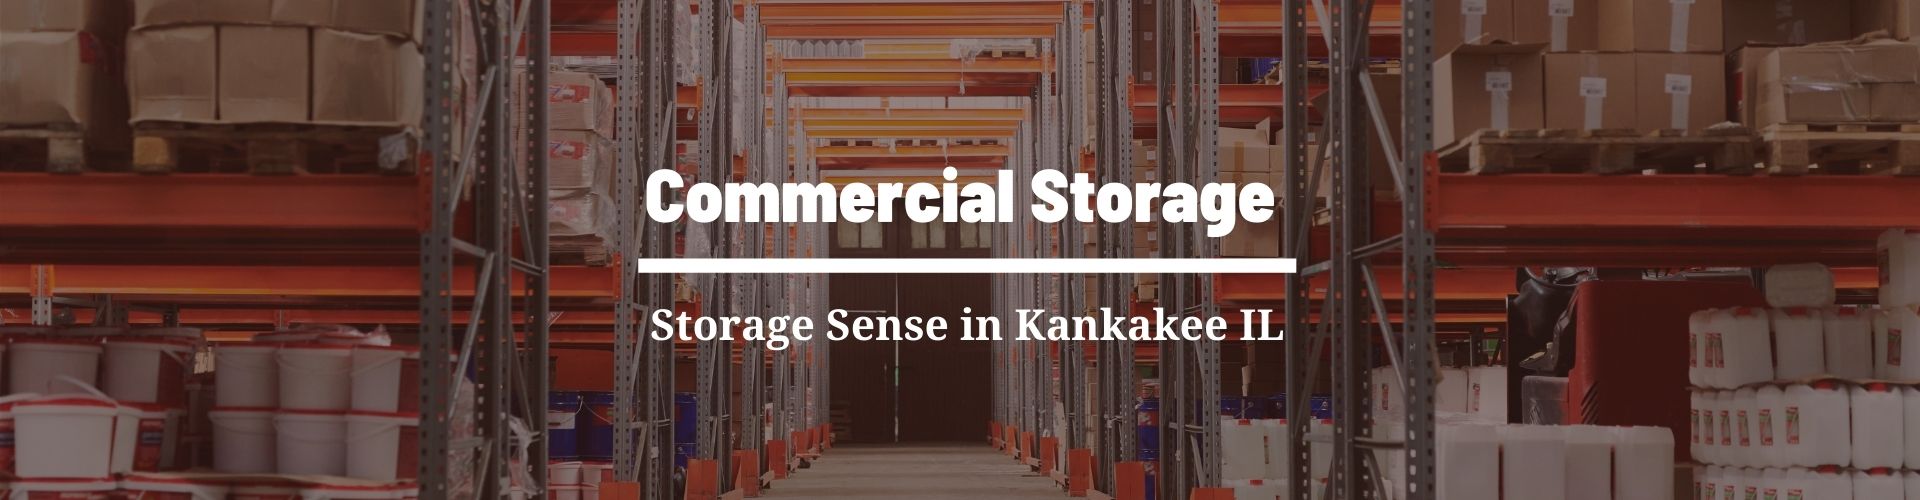 Commercial Storage Kankakee IL